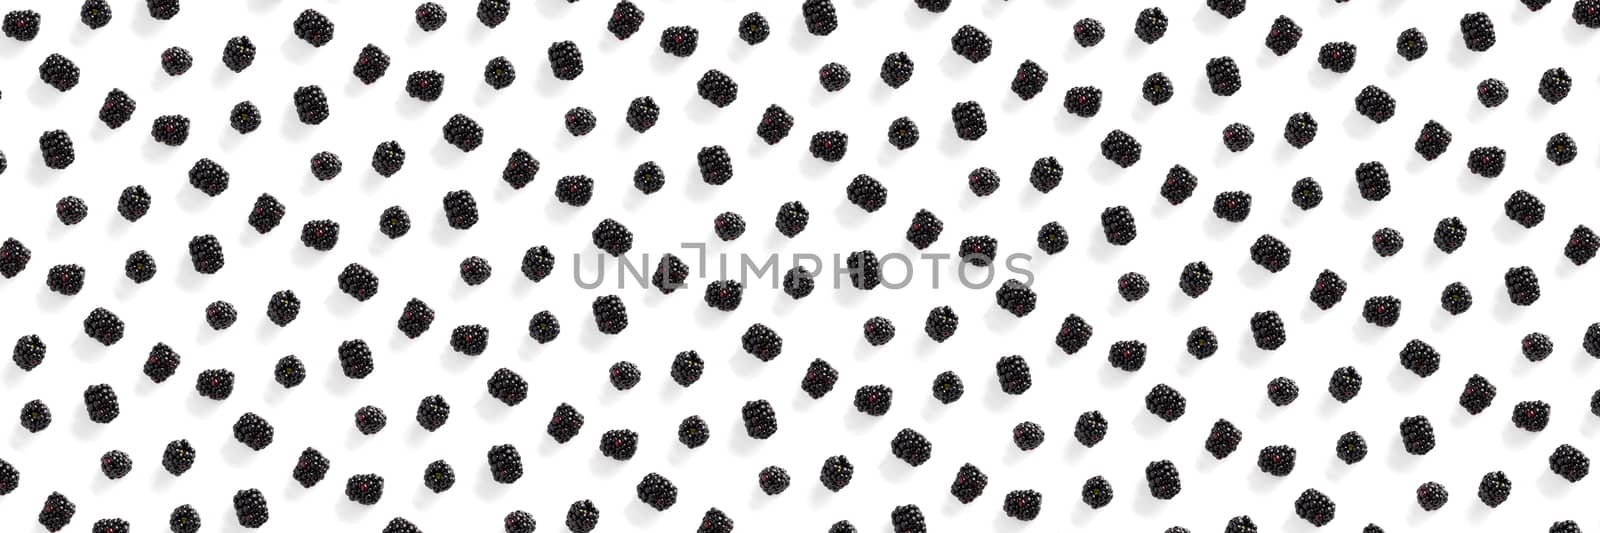 Banner Background from isolated brambles. Group of tasty blackberry isolated on white background. modern backround of falling blackberry or bramble. by PhotoTime